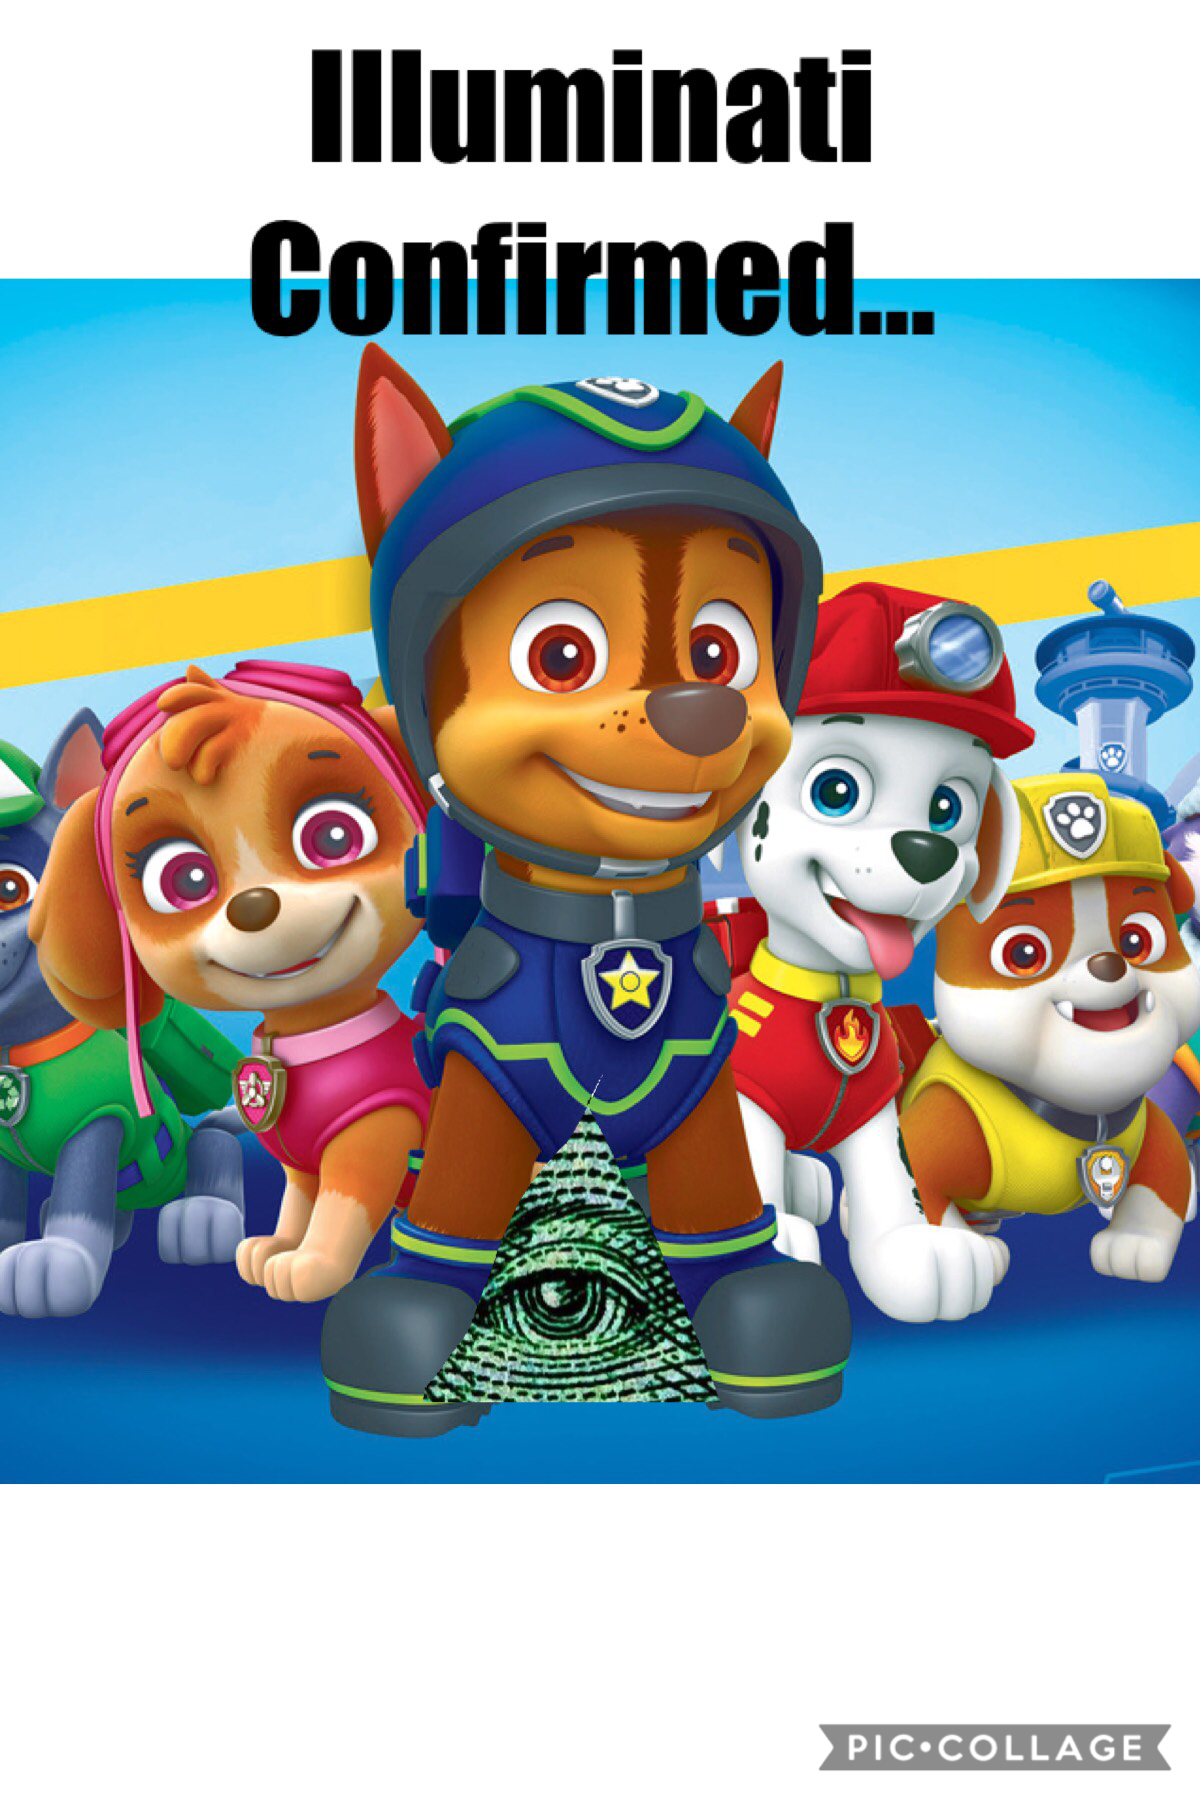 How could you Chase?
#pawpatrol #illuminaticonfirmed 